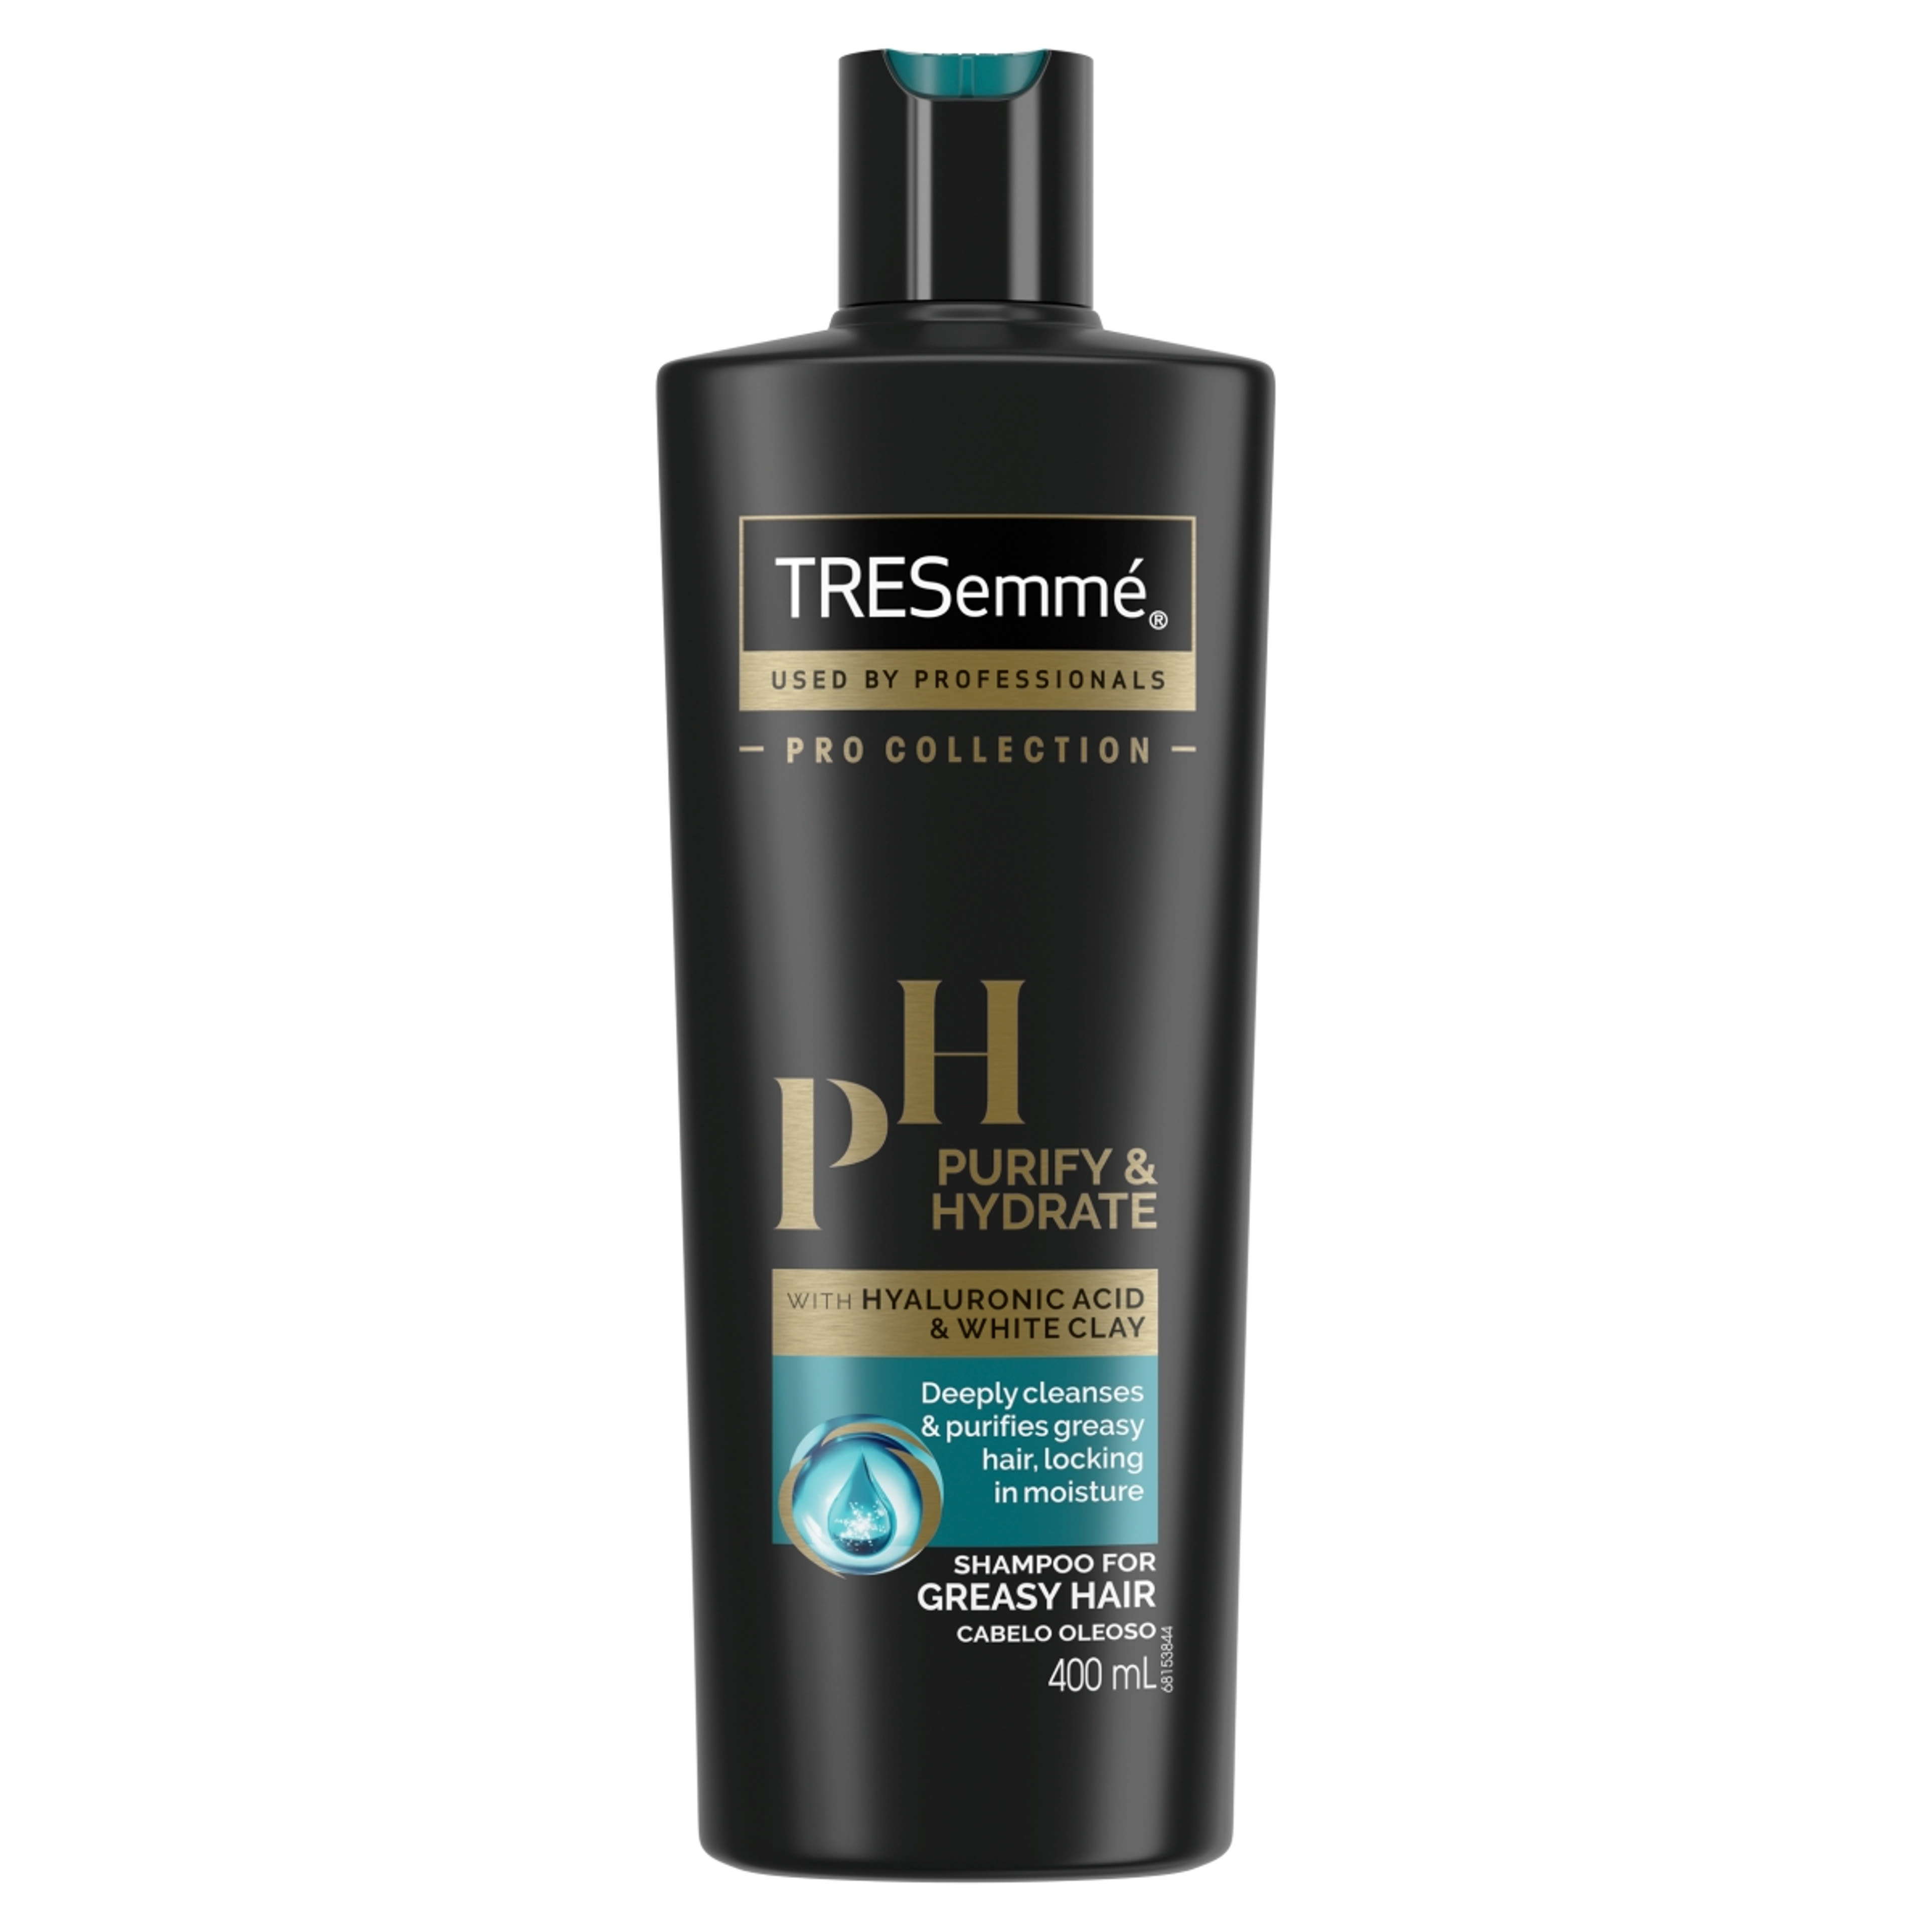 Tresemme purify & hydrate sampon - 400 ml-1